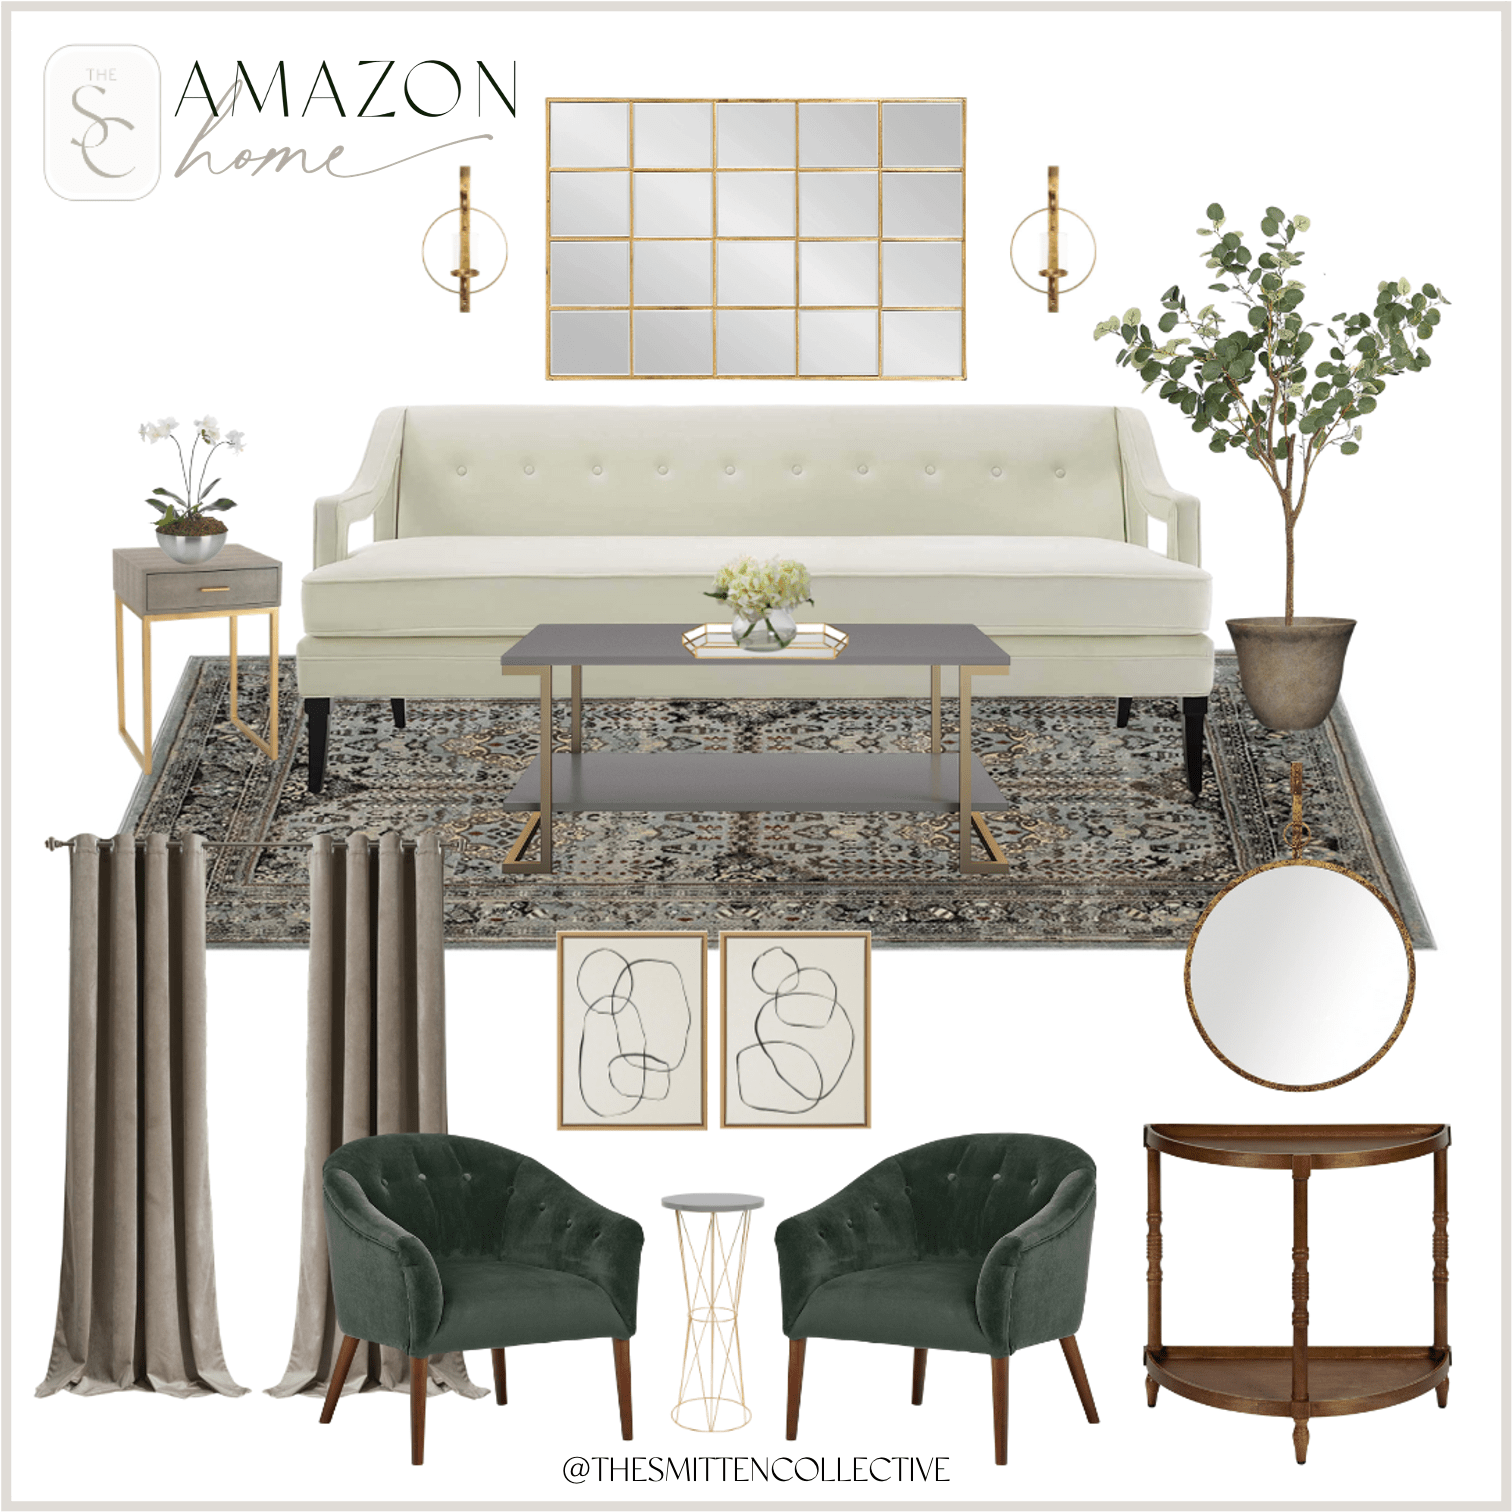 A living room design board featuring furniture and home decor pieces from Amazon